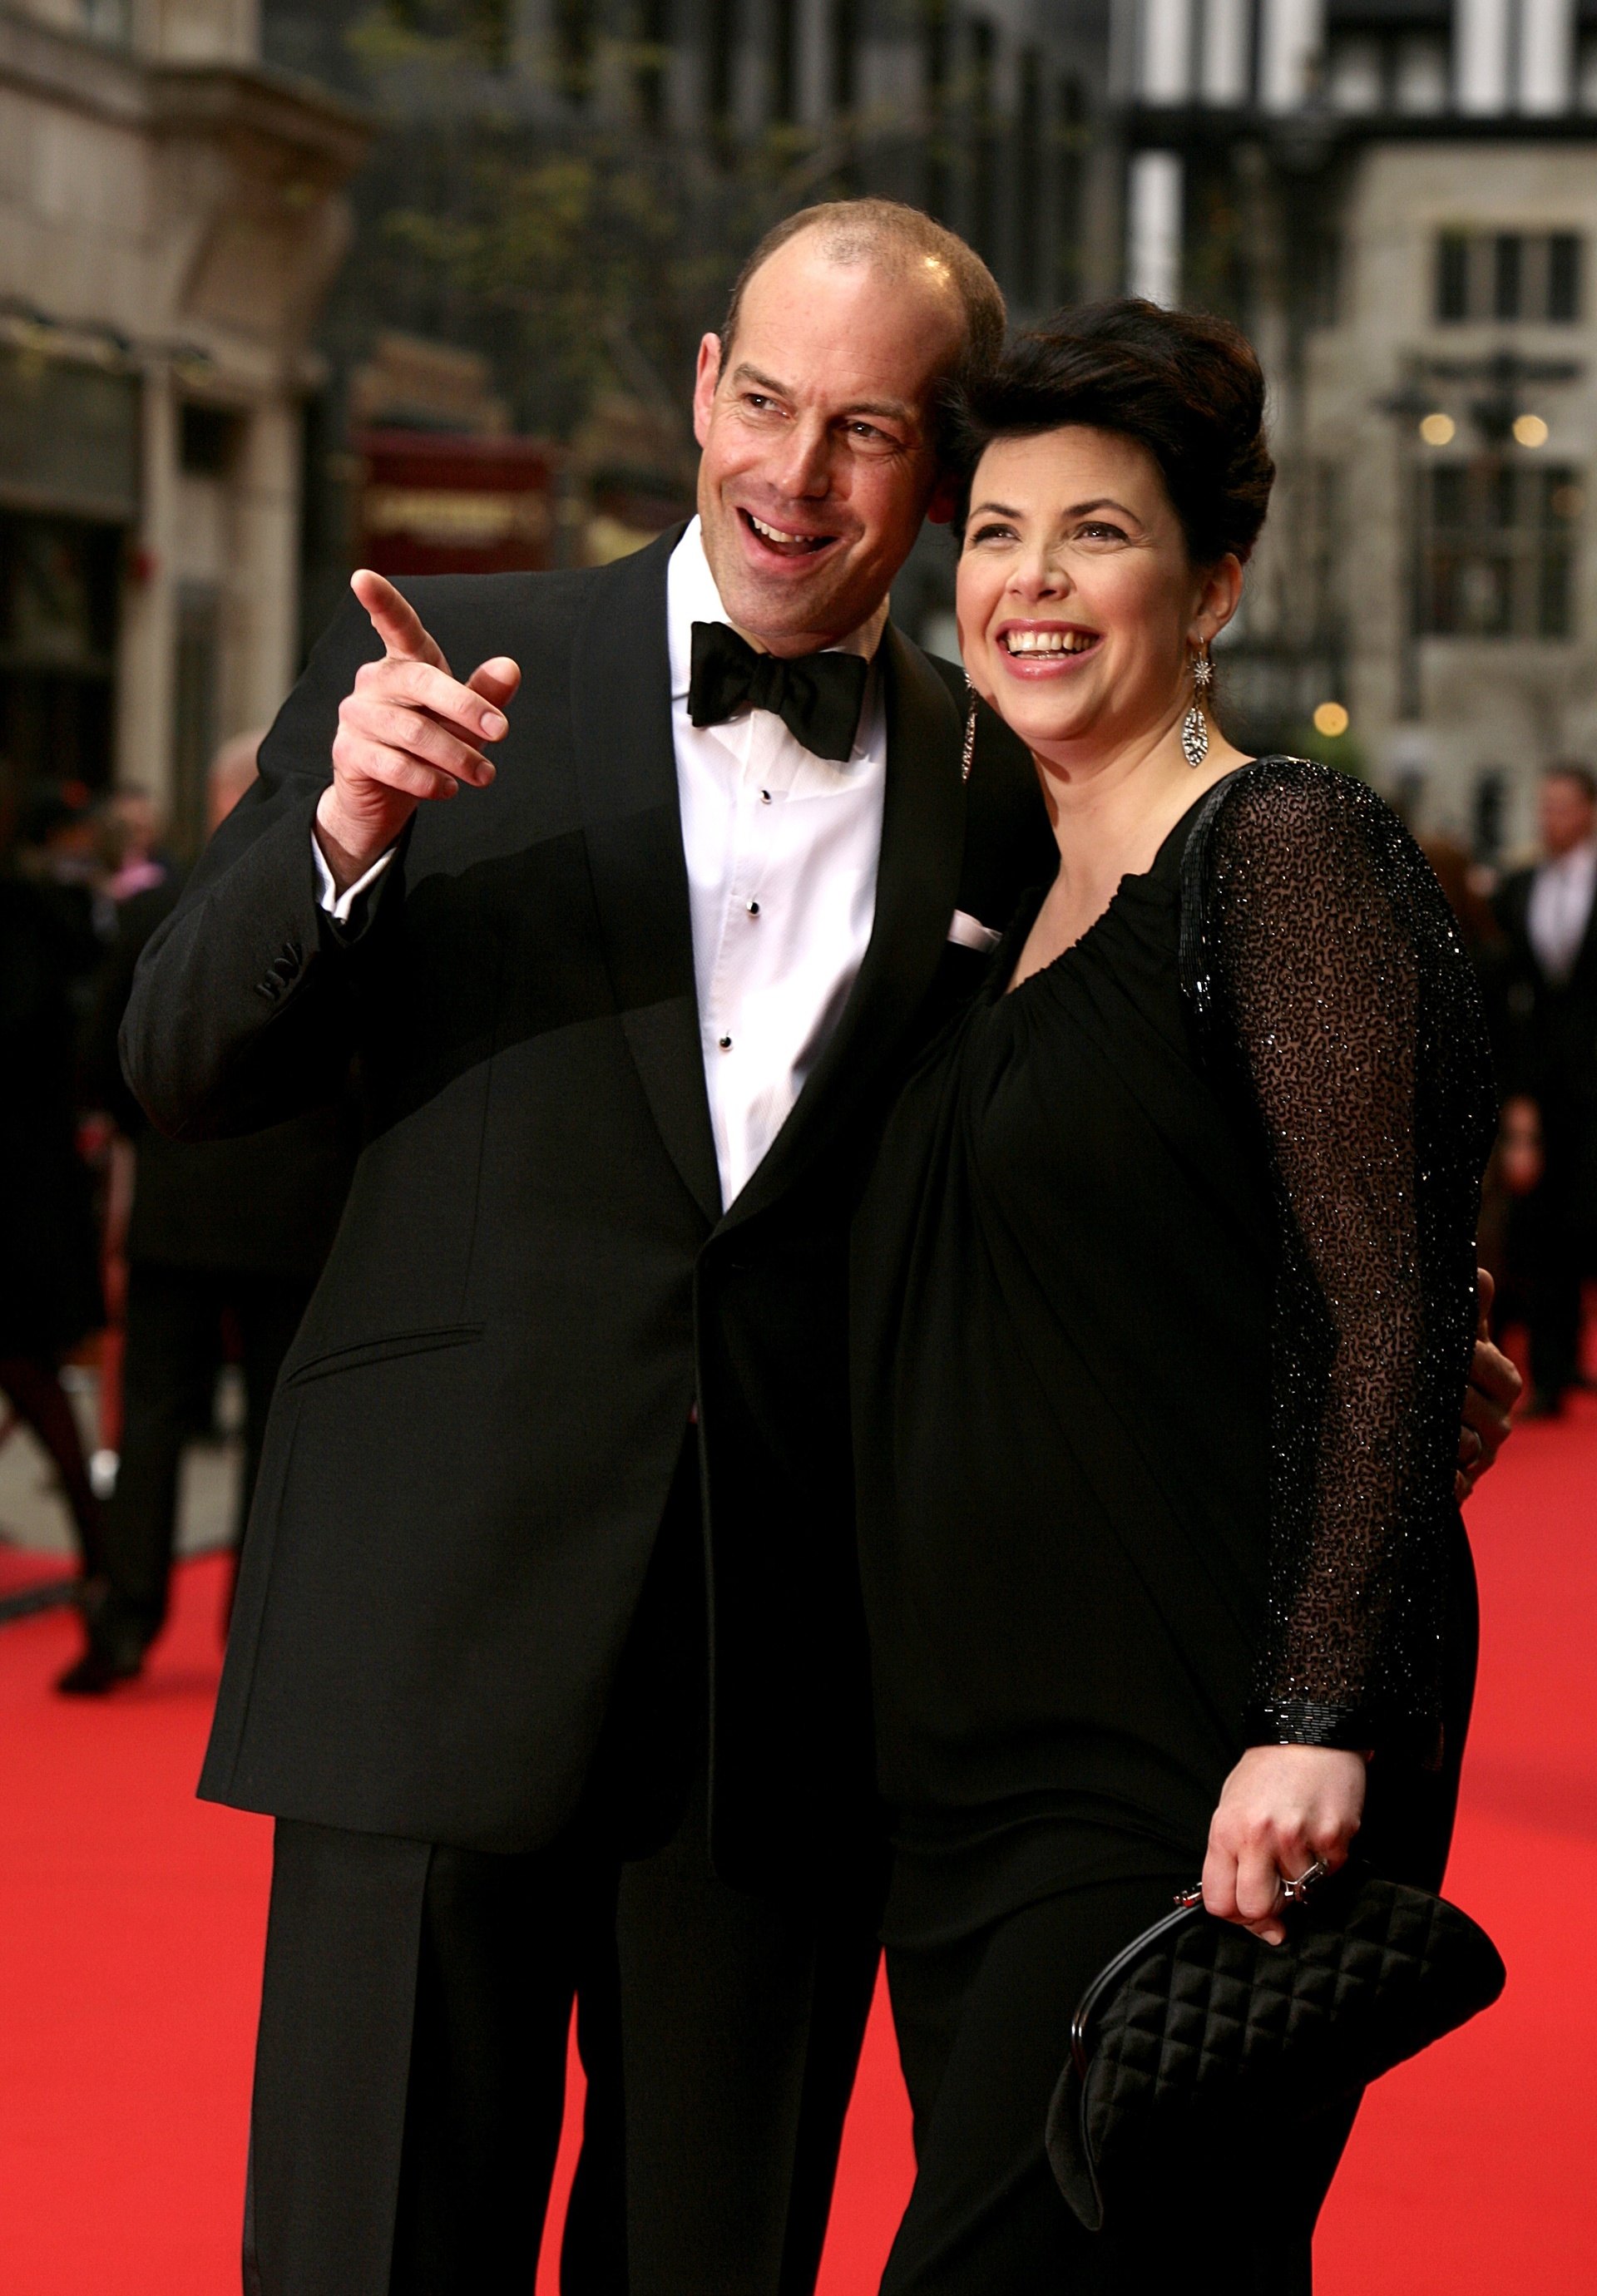 Spencer’s co-star Kirstie Allsopp paid tribute to his family.